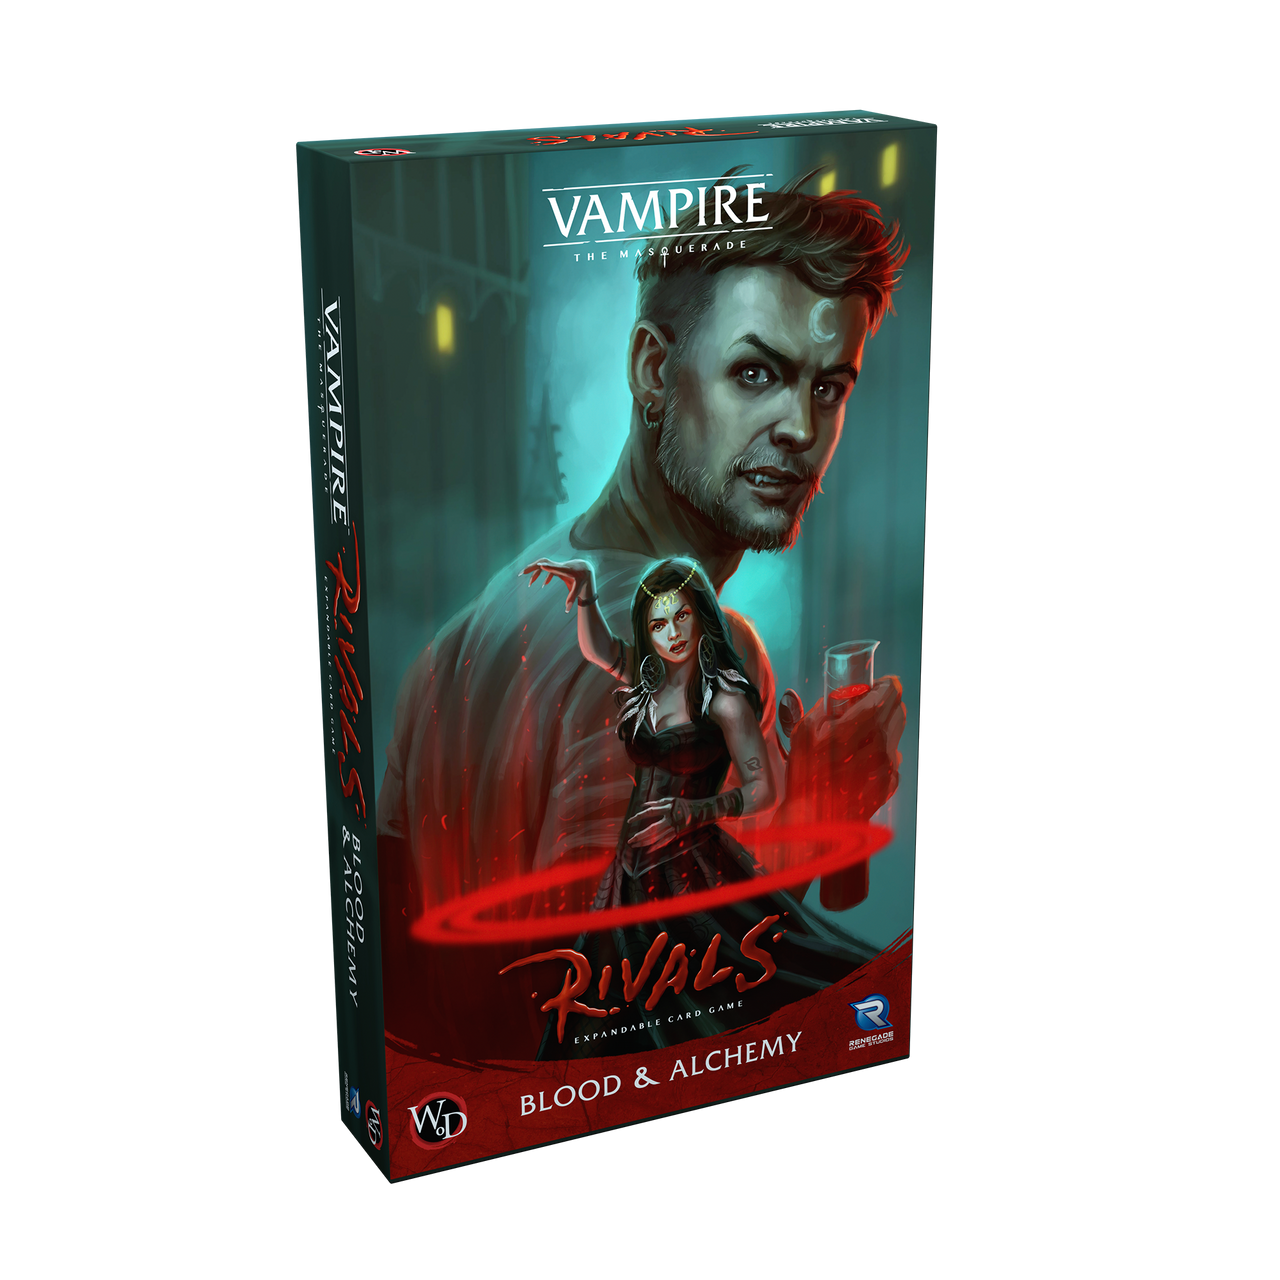 Vampire: The Masquerade Rivals Expandable Card Game: Justice & Mercy - Clan  Card Game, Ages 14+, 2-4 Players, 30-70 Min 